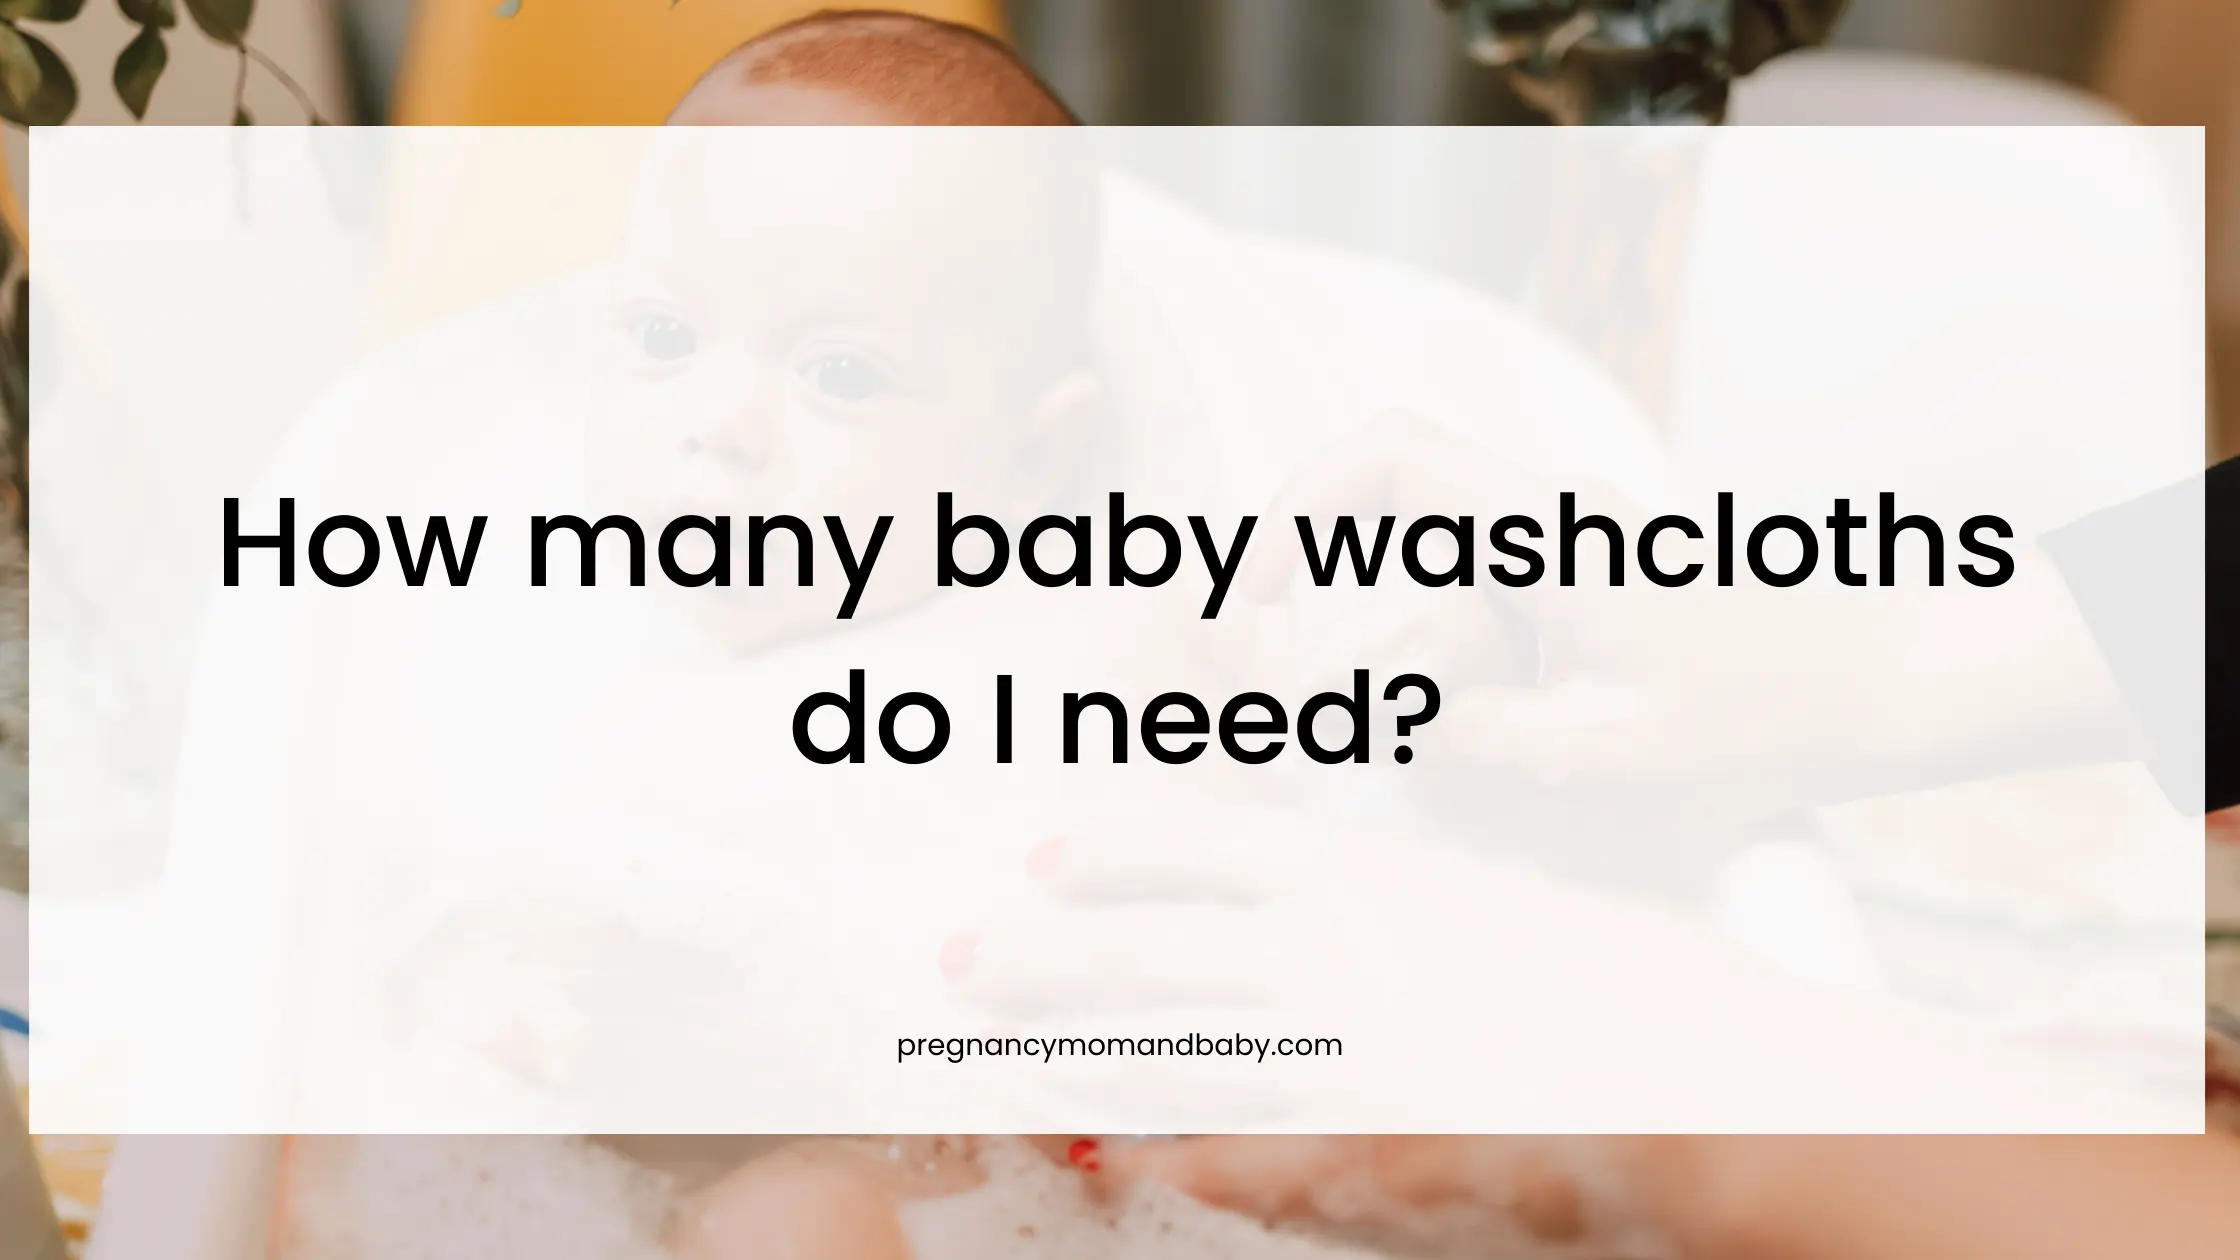 How many baby towels or washcloths do I need